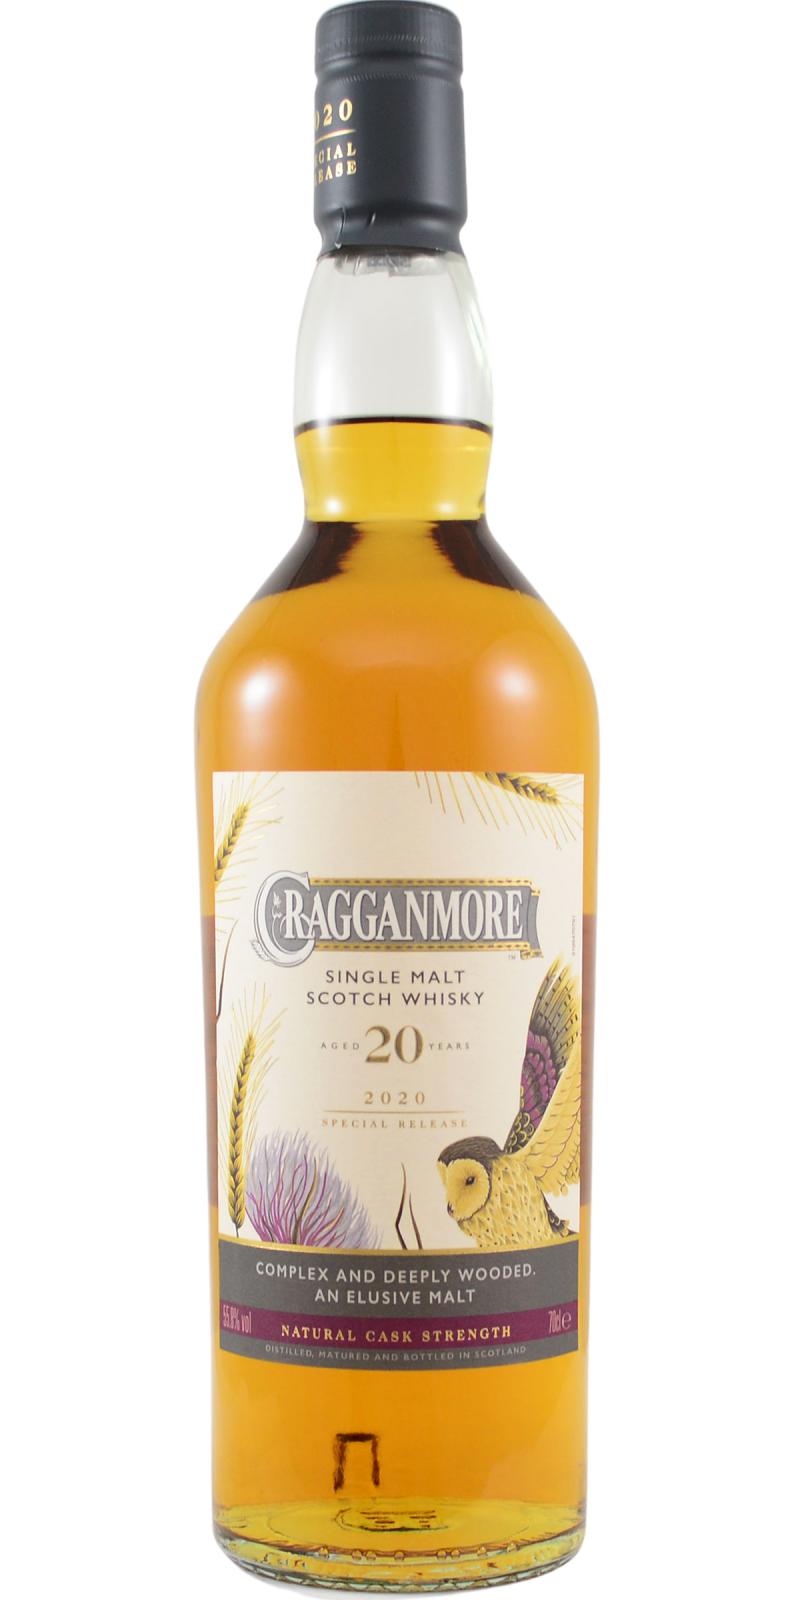 Cragganmore 20-year-old